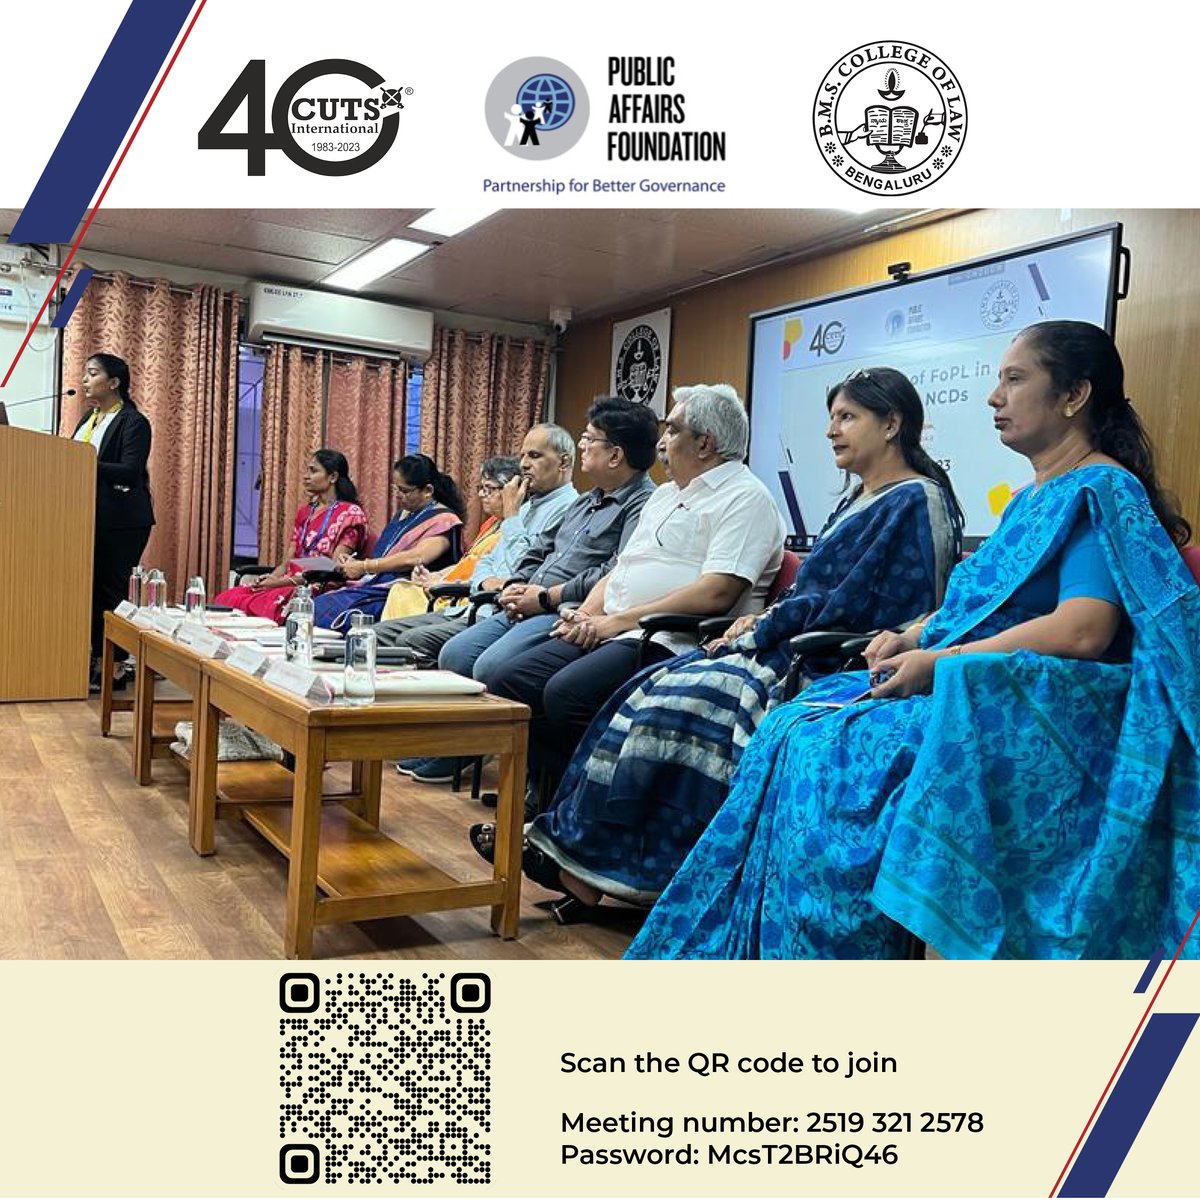 Commencing the State Level Consultation on importance of FoPL - Scan the QR code to join the live session.

@annaravi 
@onthinktanks
@cutsint
@pacindia
@MoHFW_INDIA
@pafglobal